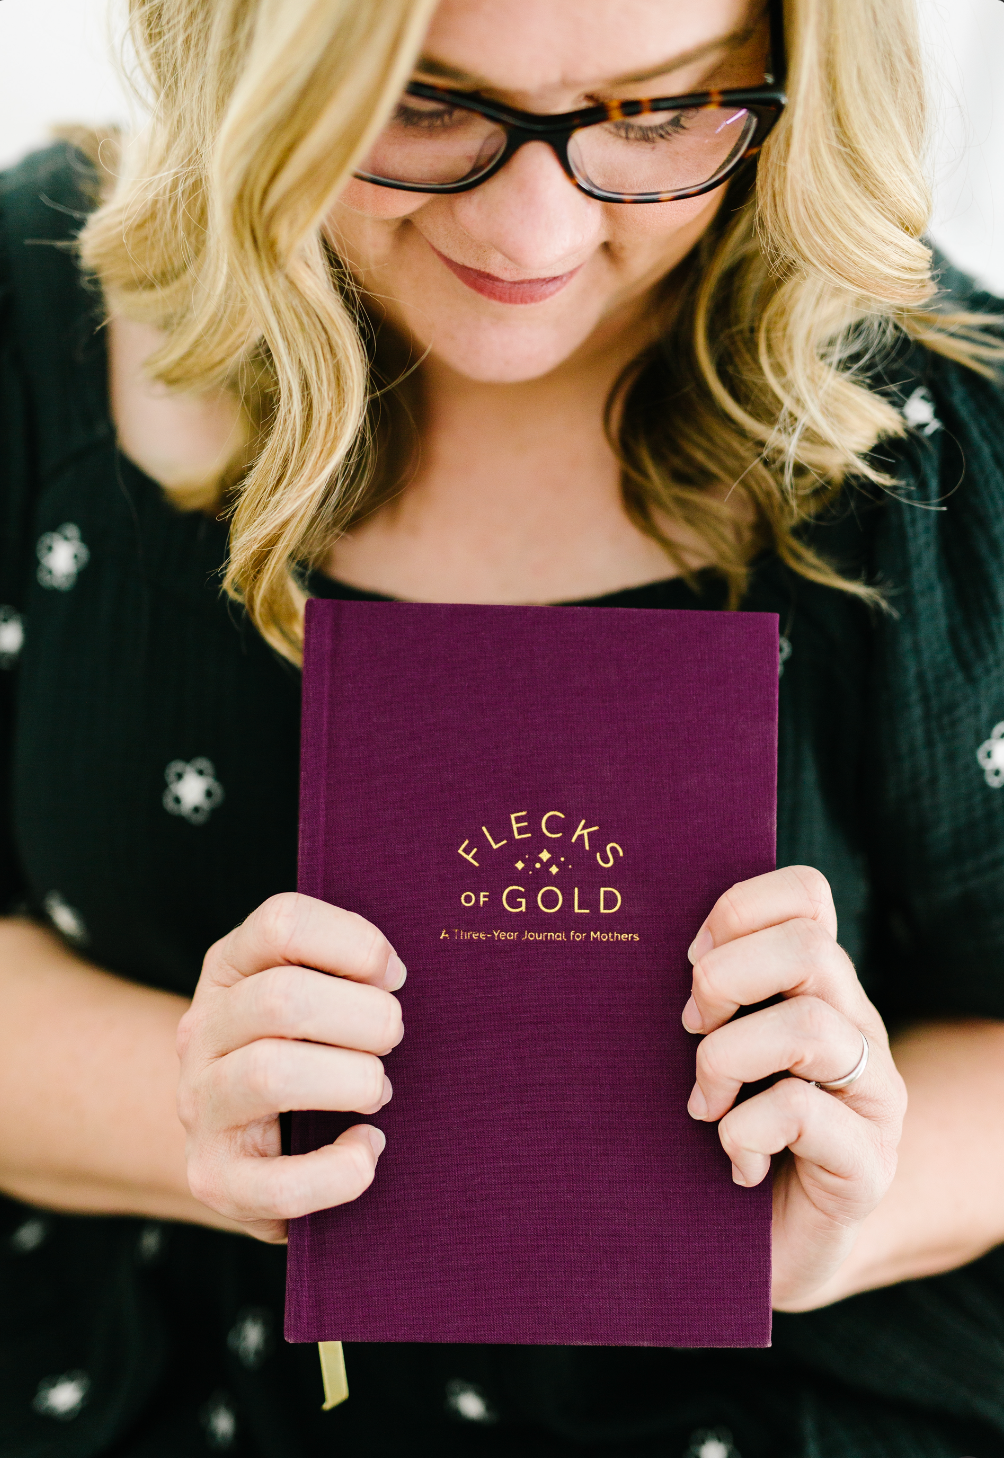 Rachel Nielson, host of the 3 in 30 Takeaways for Moms Podcast, holds a Flecks of Gold Journal- a 3 year journal for moms.  This journal helps moms who are overwhelmed see the beauty, magic, and gold in their everyday moments.